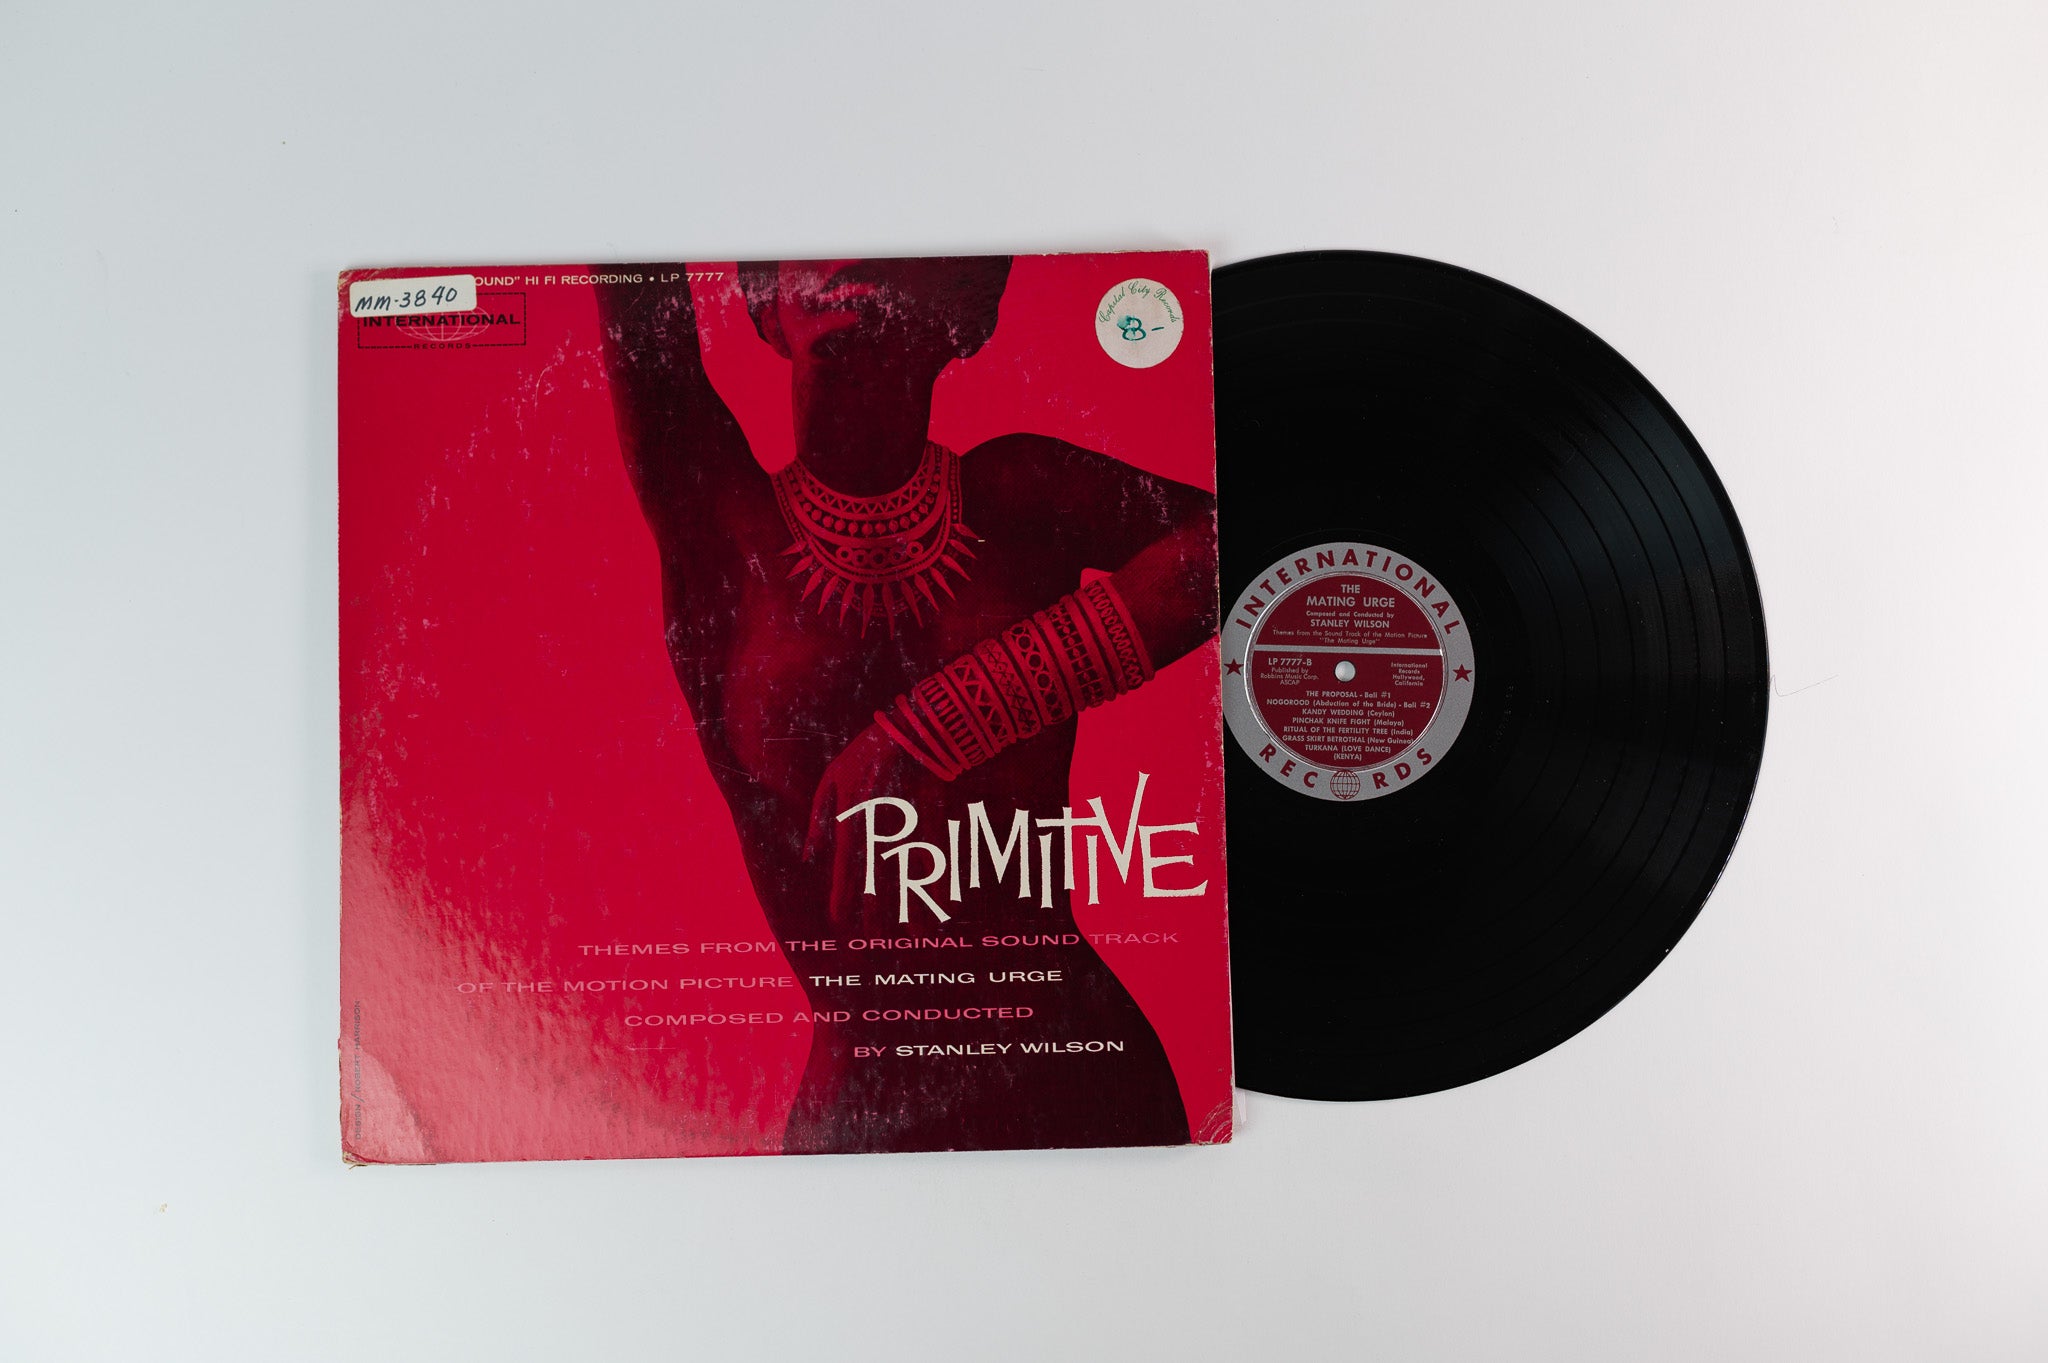 Stanley Wilson - Primitive (Themes From Original Soundtack Mating Urge) on International